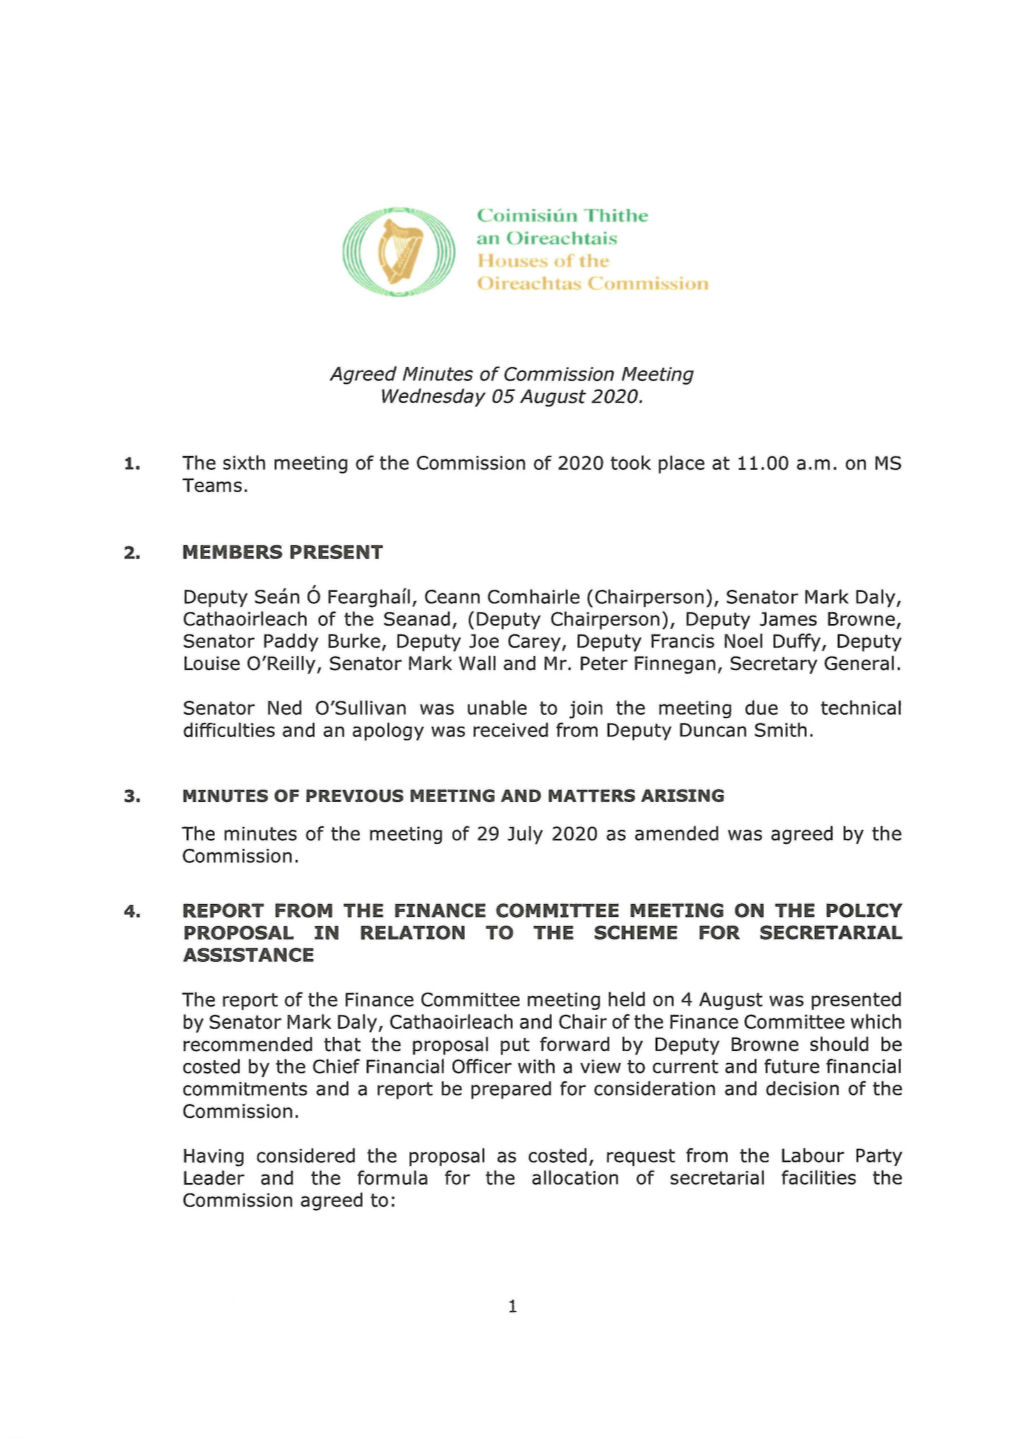 Houses of the Oireachtas Commission Minutes